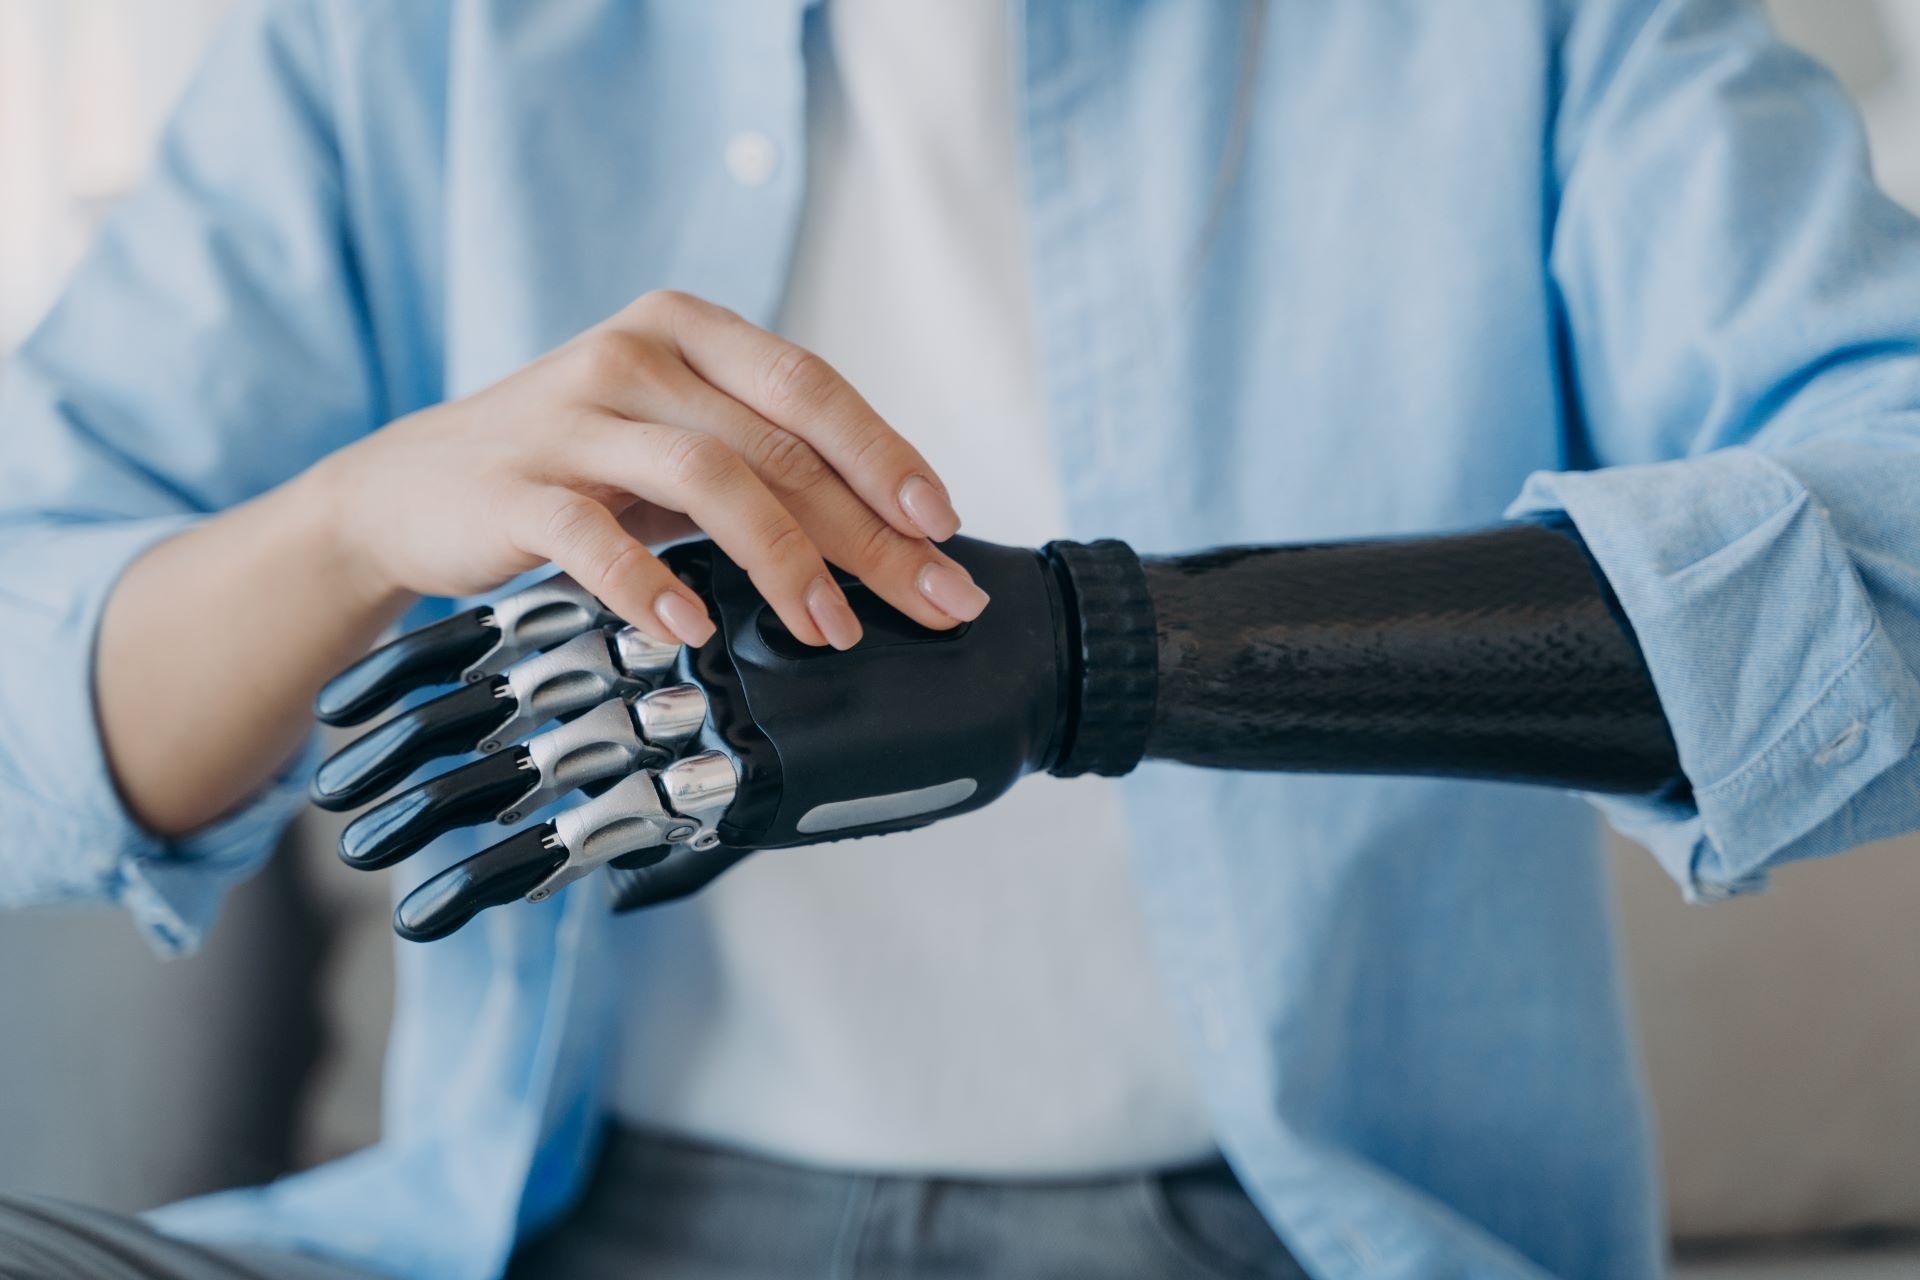 Cure Bionics is developing 3D-printed prosthetic limbs